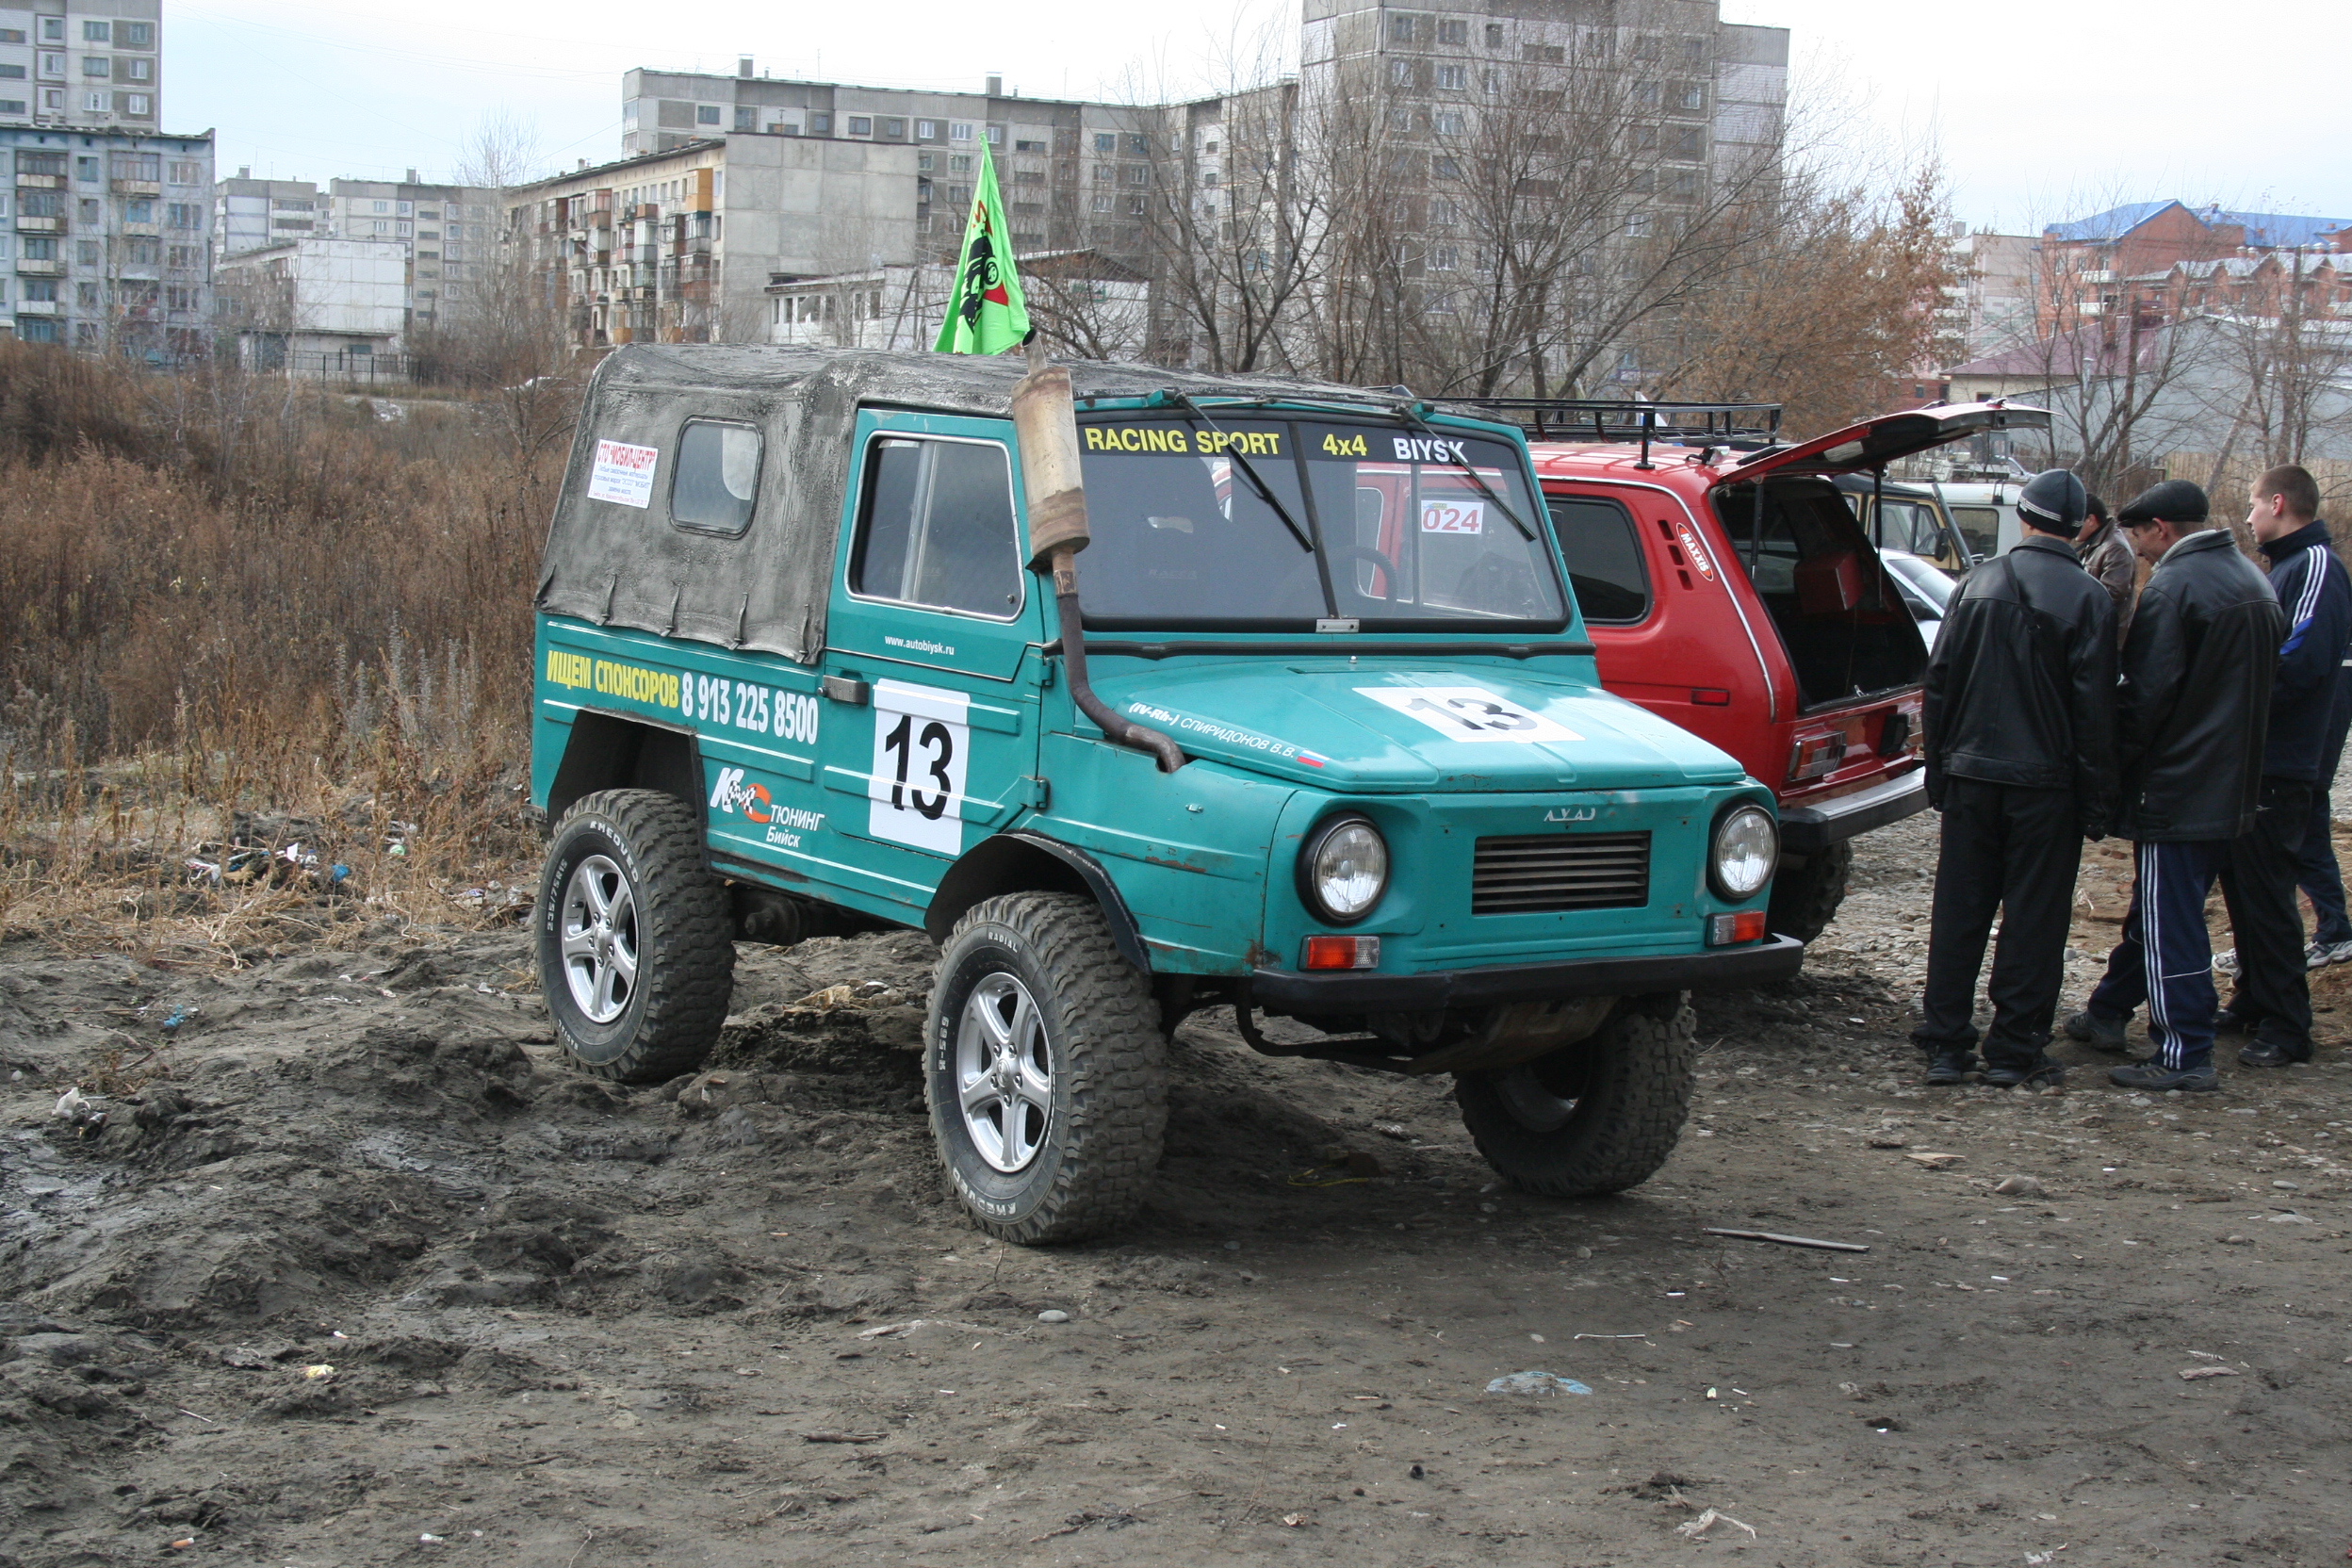 File:Russian off-road car Luaz after tuning.jpg - Wikimedia Commons